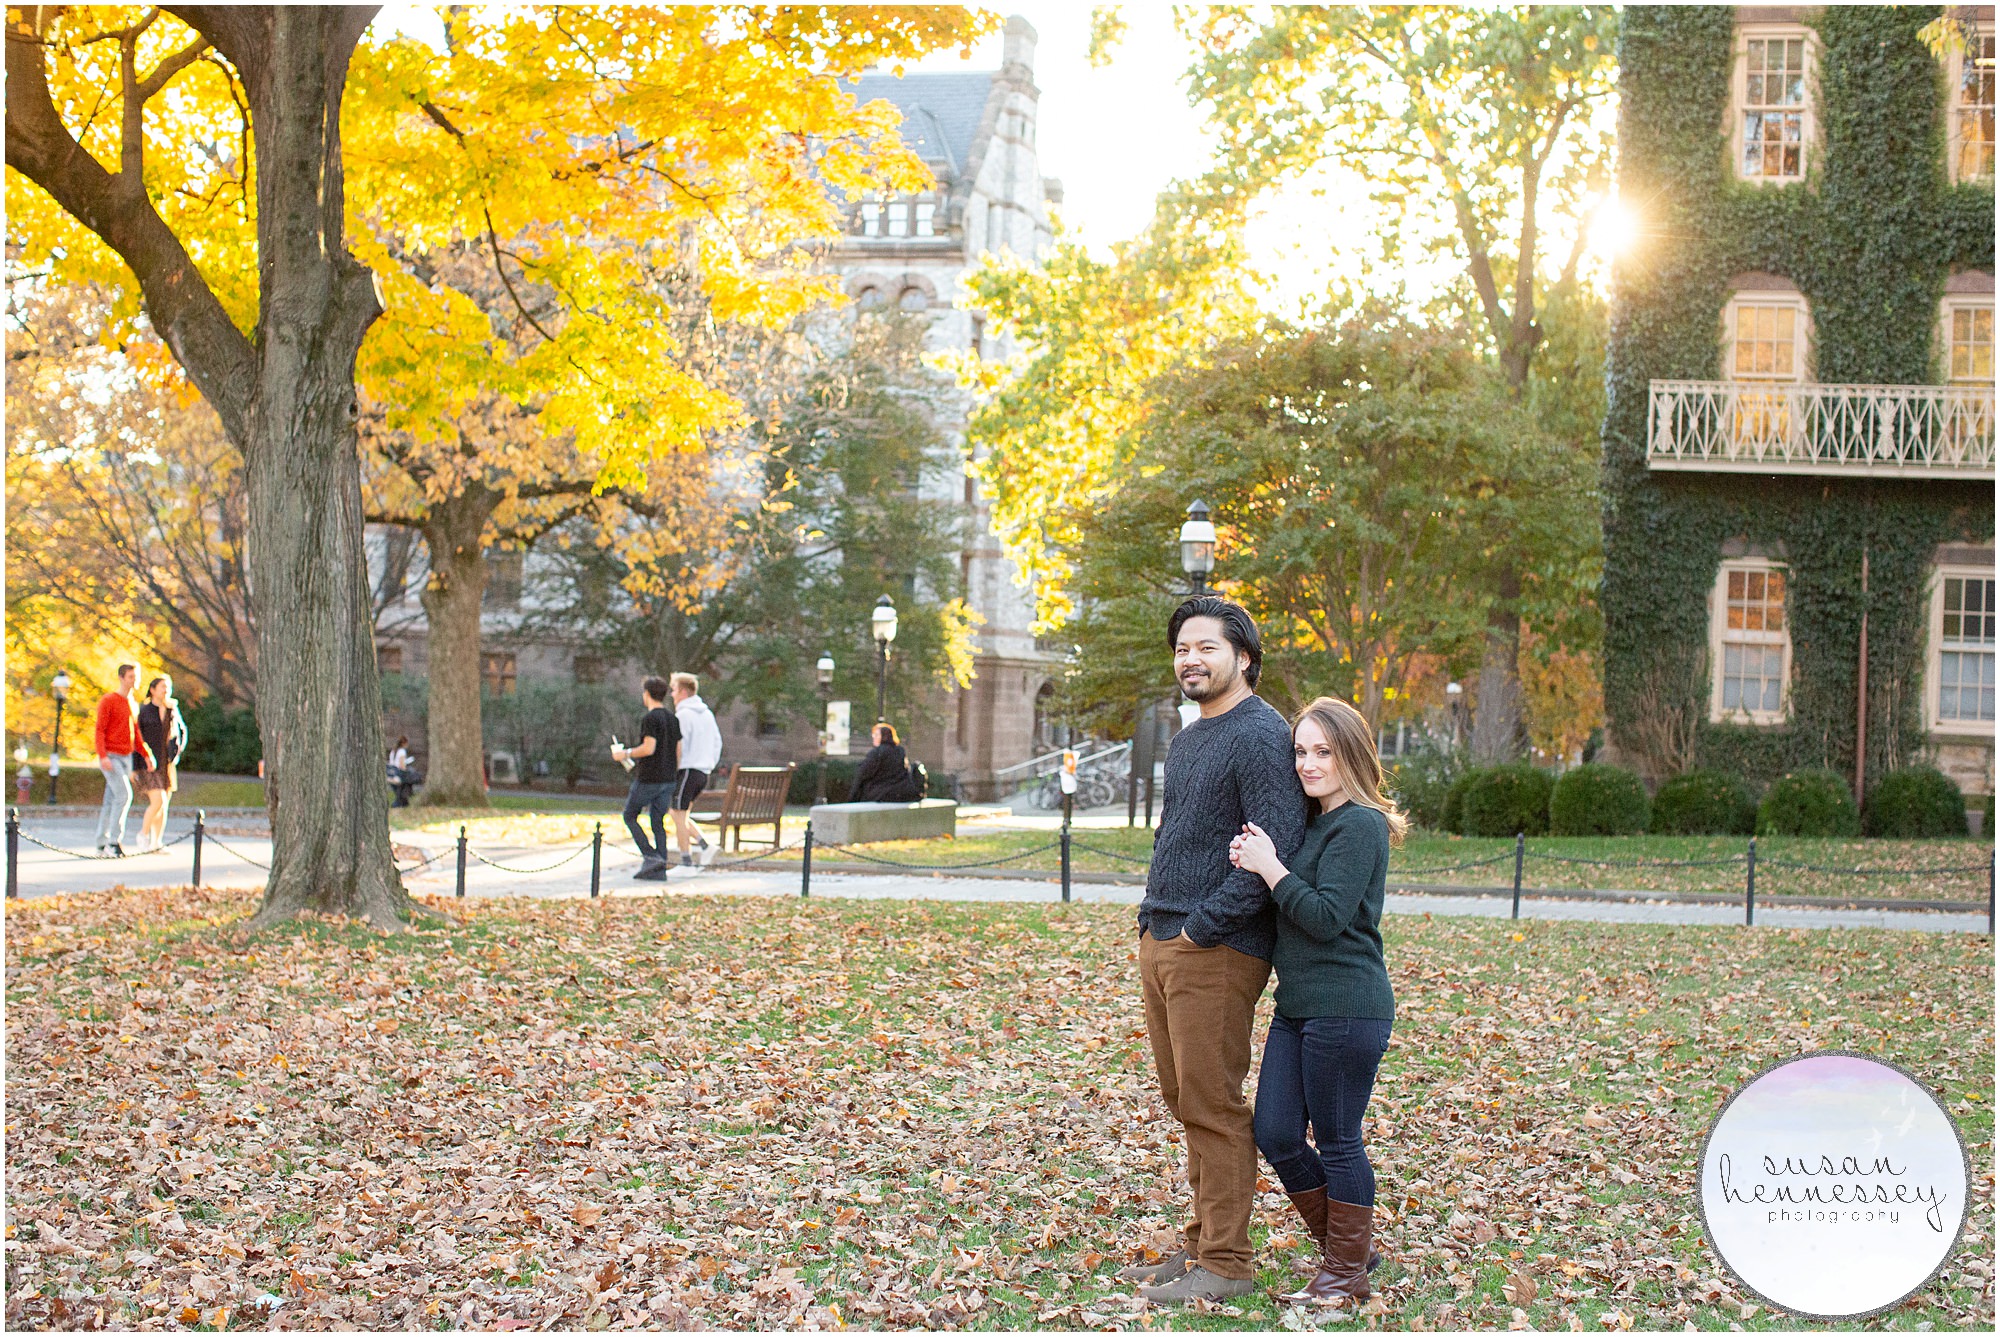 A Fall engagement session at Princeton University